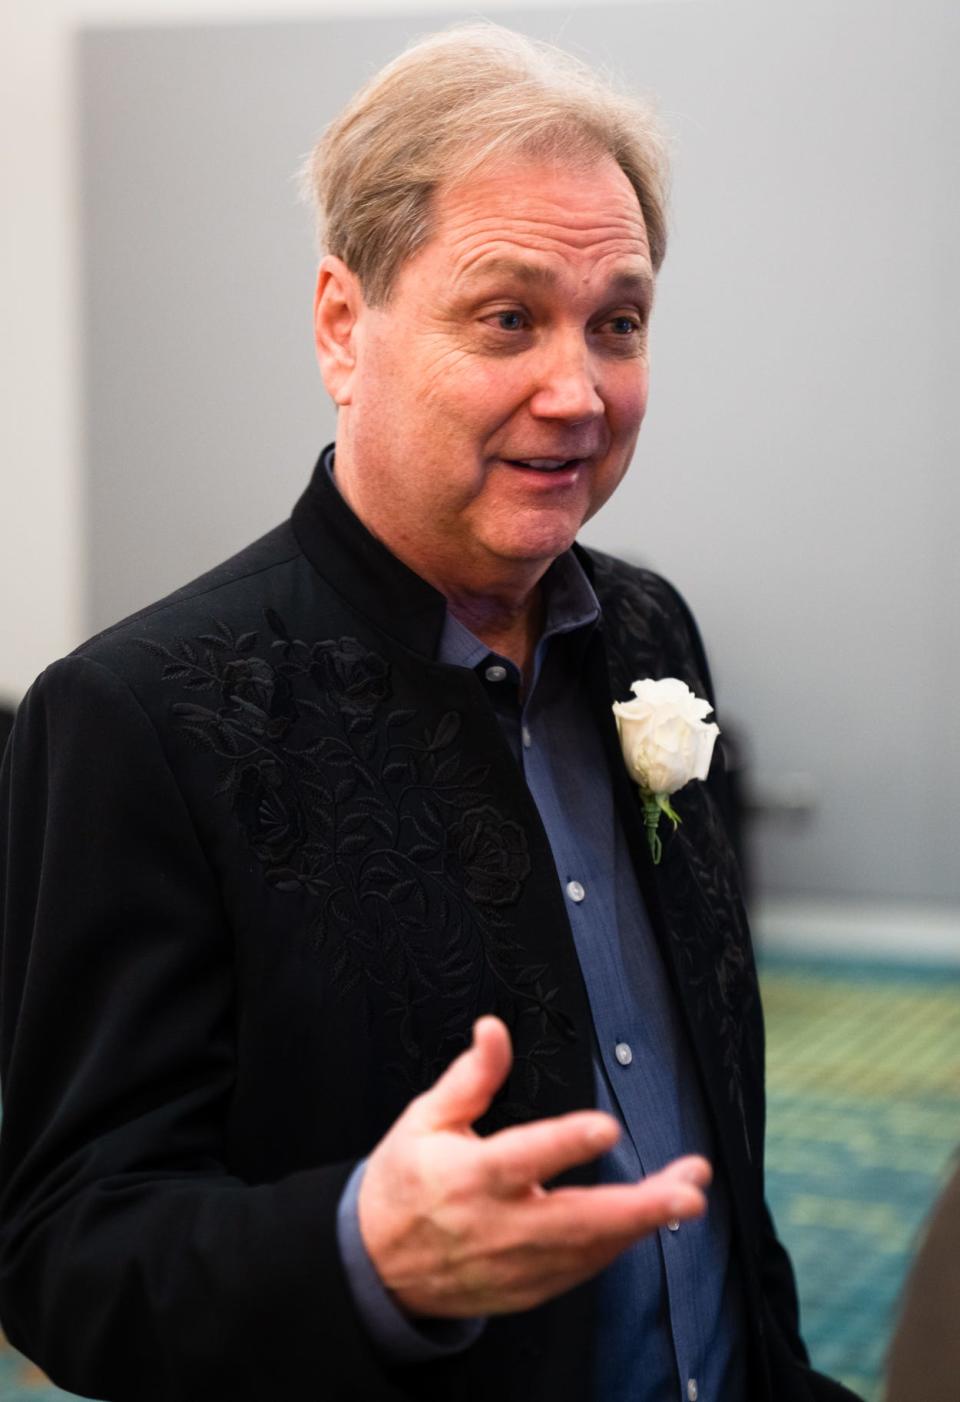 2022 inductee Steve Wariner speaks during interviews at the 52nd Nashville Songwriters Hall of Fame Gala at Music City Center on Oct 30, 2022 in Nashville, Tenn.